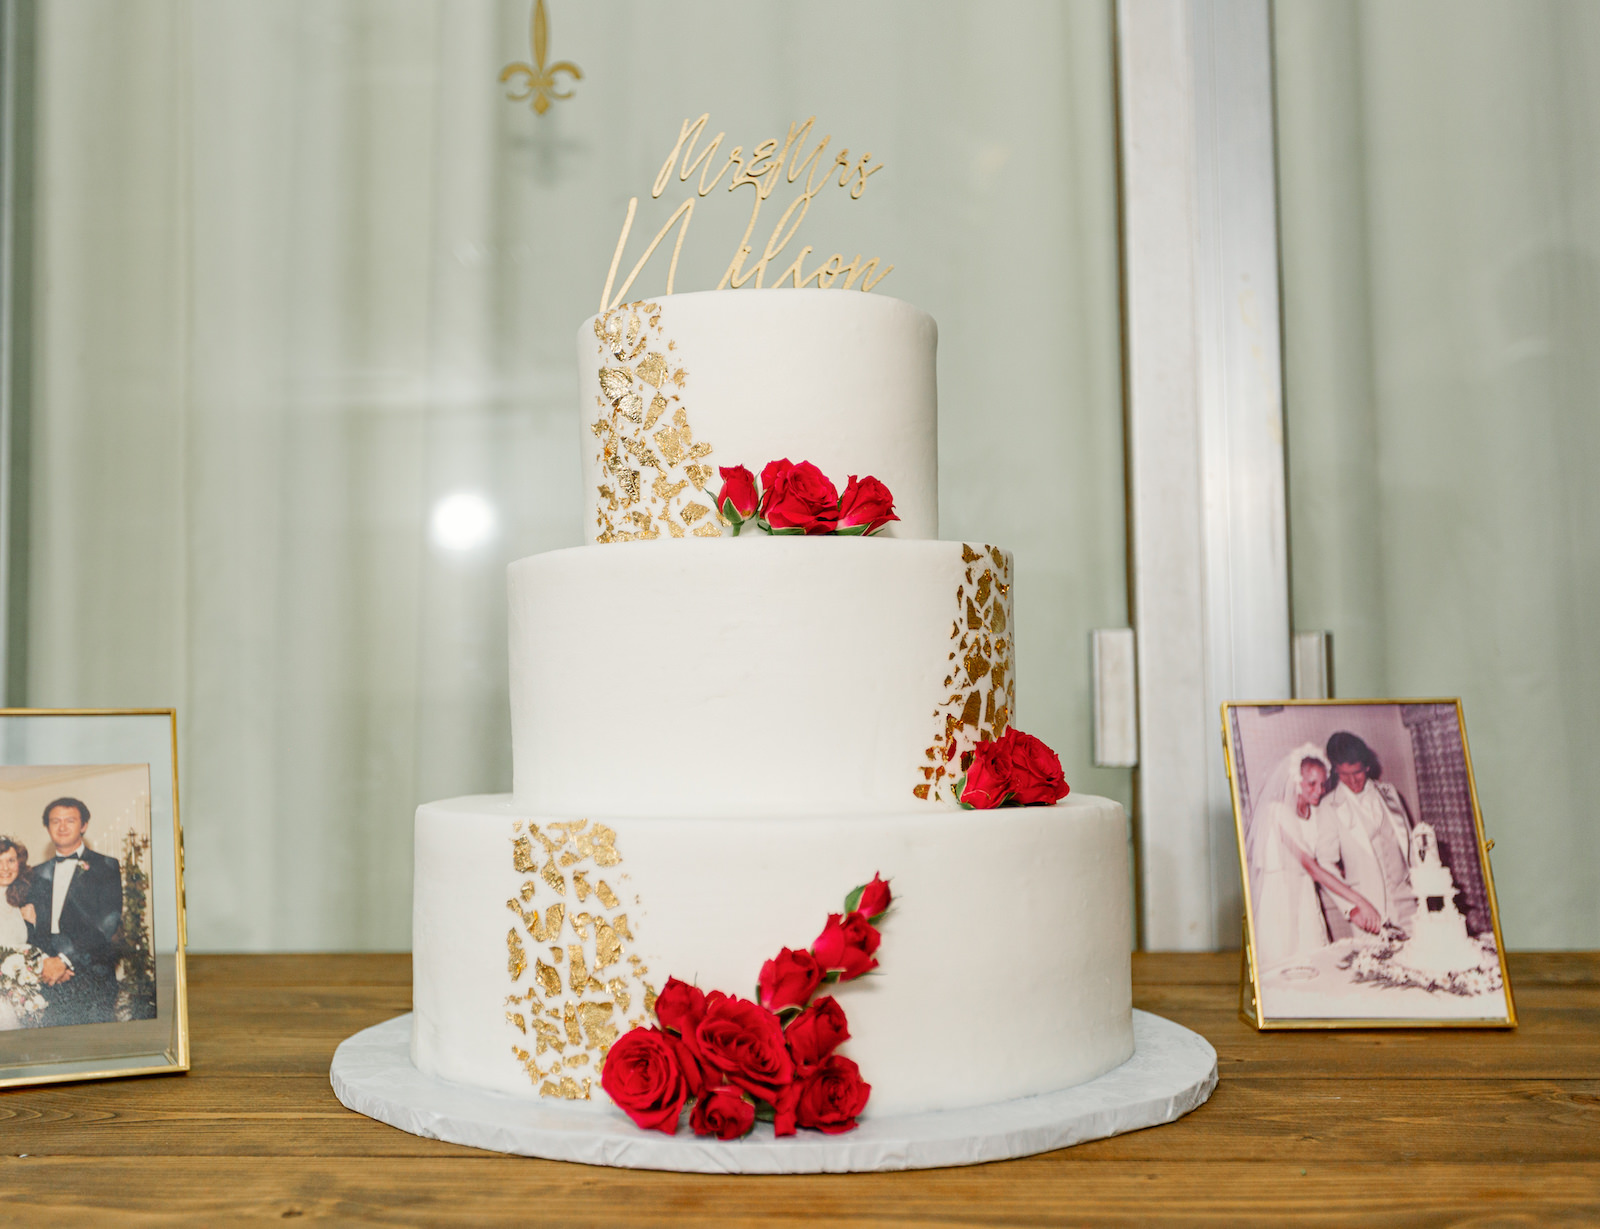 Fairytale Private Residence Wedding, Three Tier White with Gold Foil Wedding Cake and Red Roses Decor | Tampa Bay Wedding Photographer Dewitt for Love Photography | Wedding Florist Lemon Drops